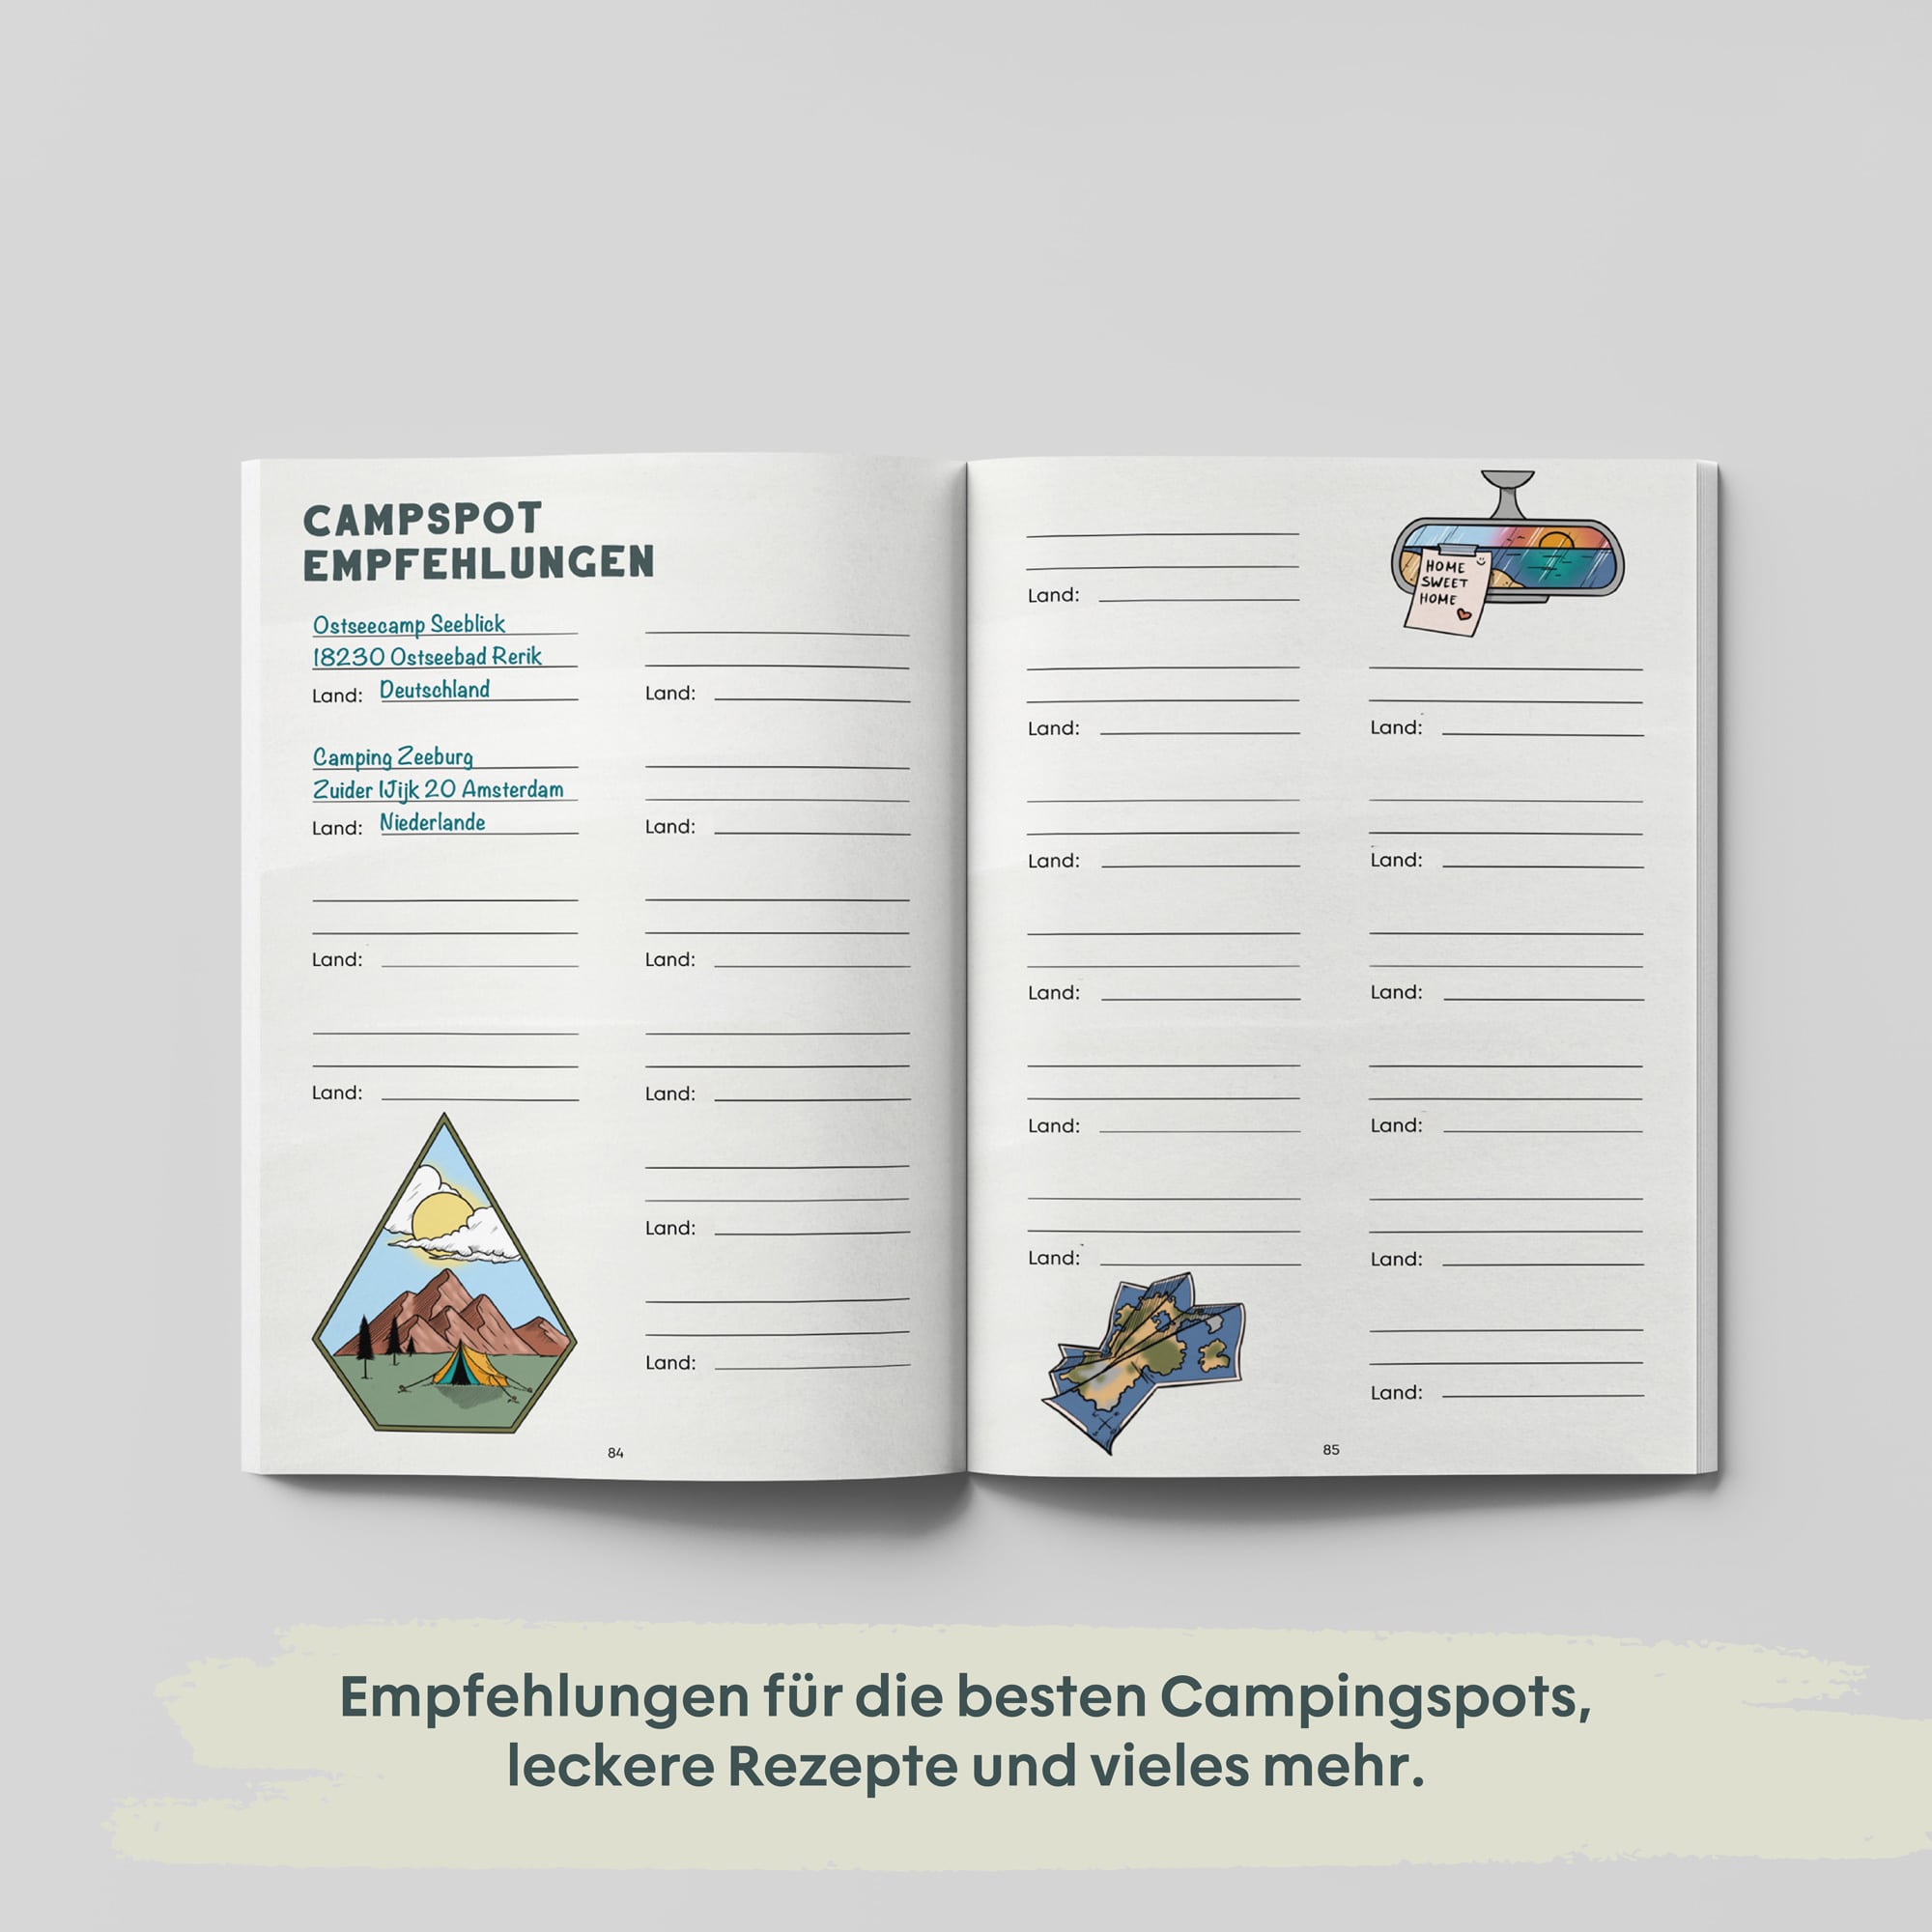 BUDDYBUCH - The friends book for campers